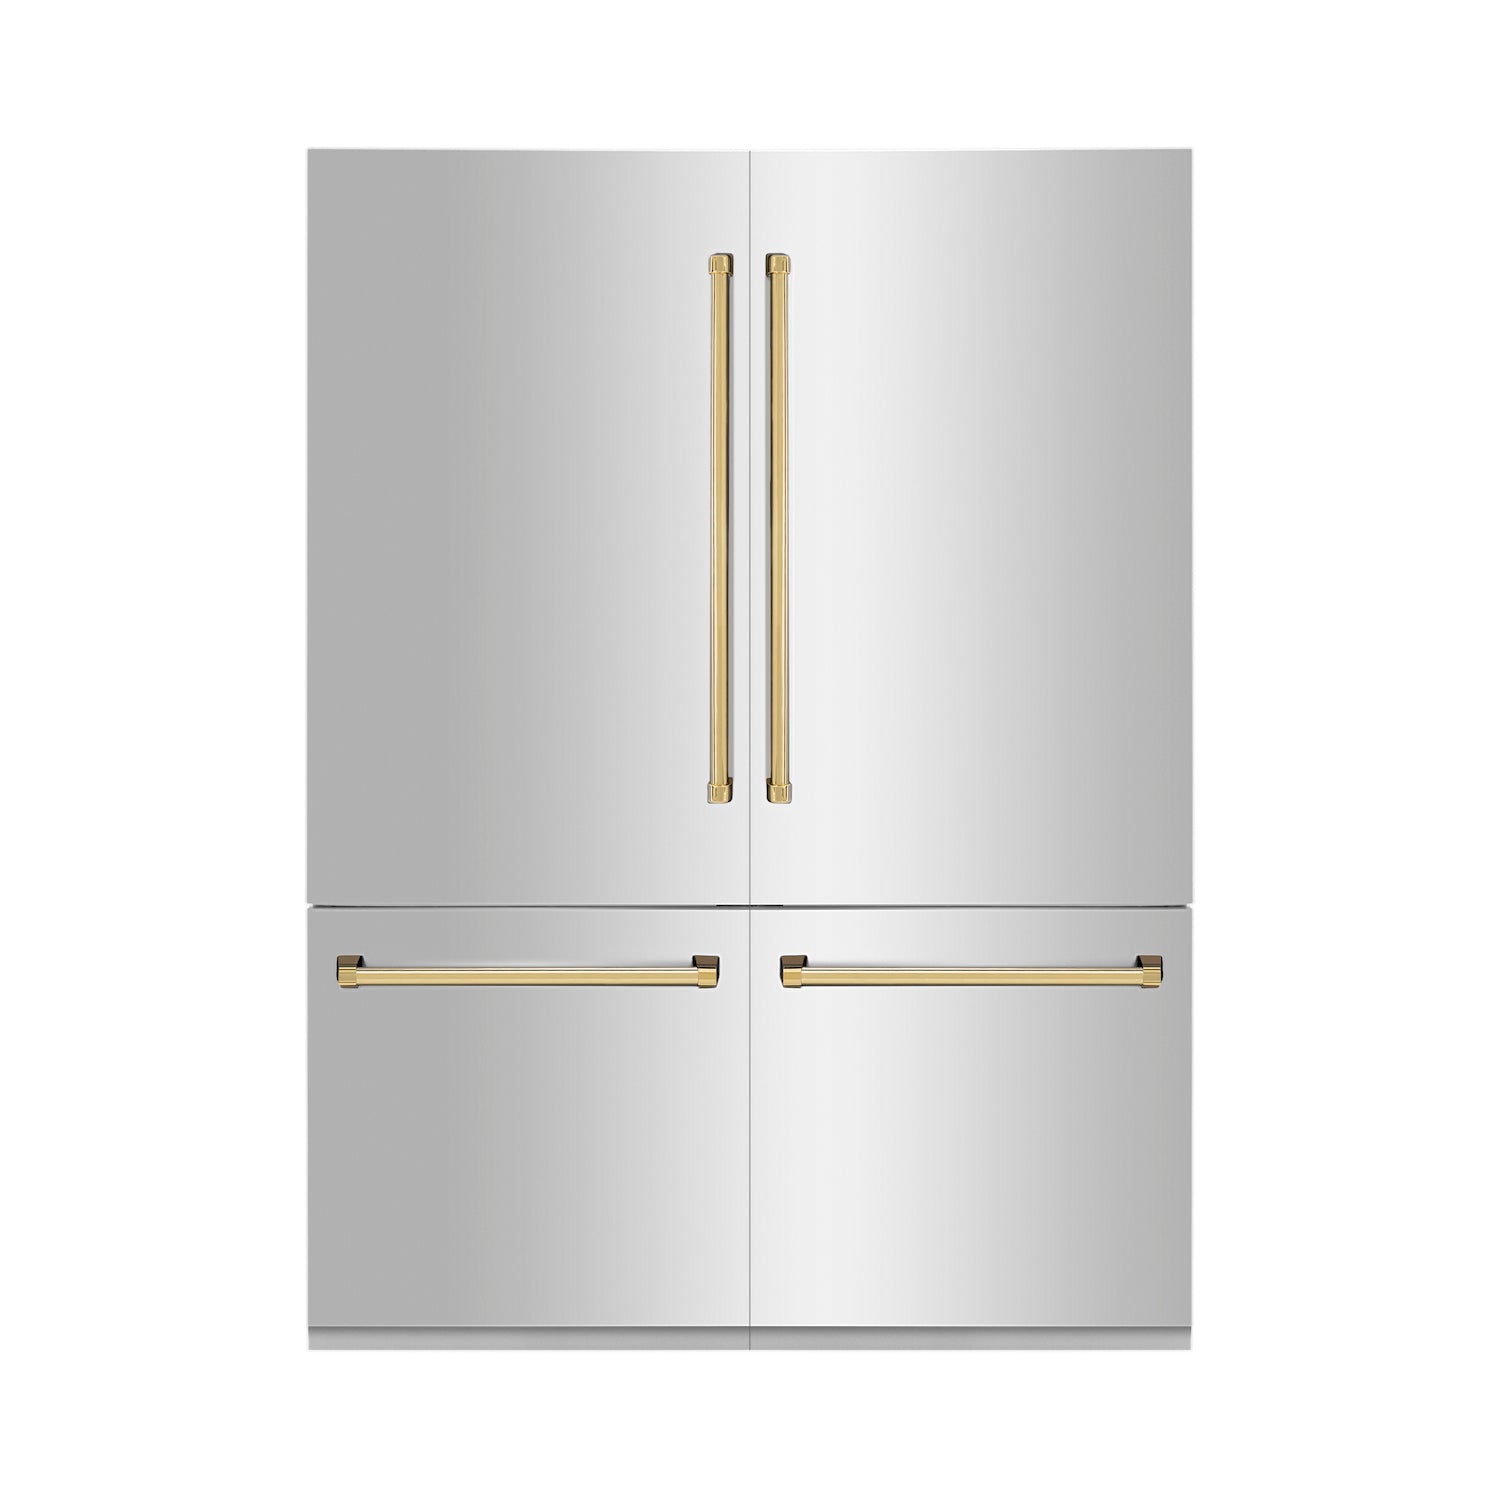 ZLINE 60" Autograph Edition Built-in 4-Door French Door Refrigerator - Stainless Steel with Polished Gold Accents, Internal Water and Ice Dispenser